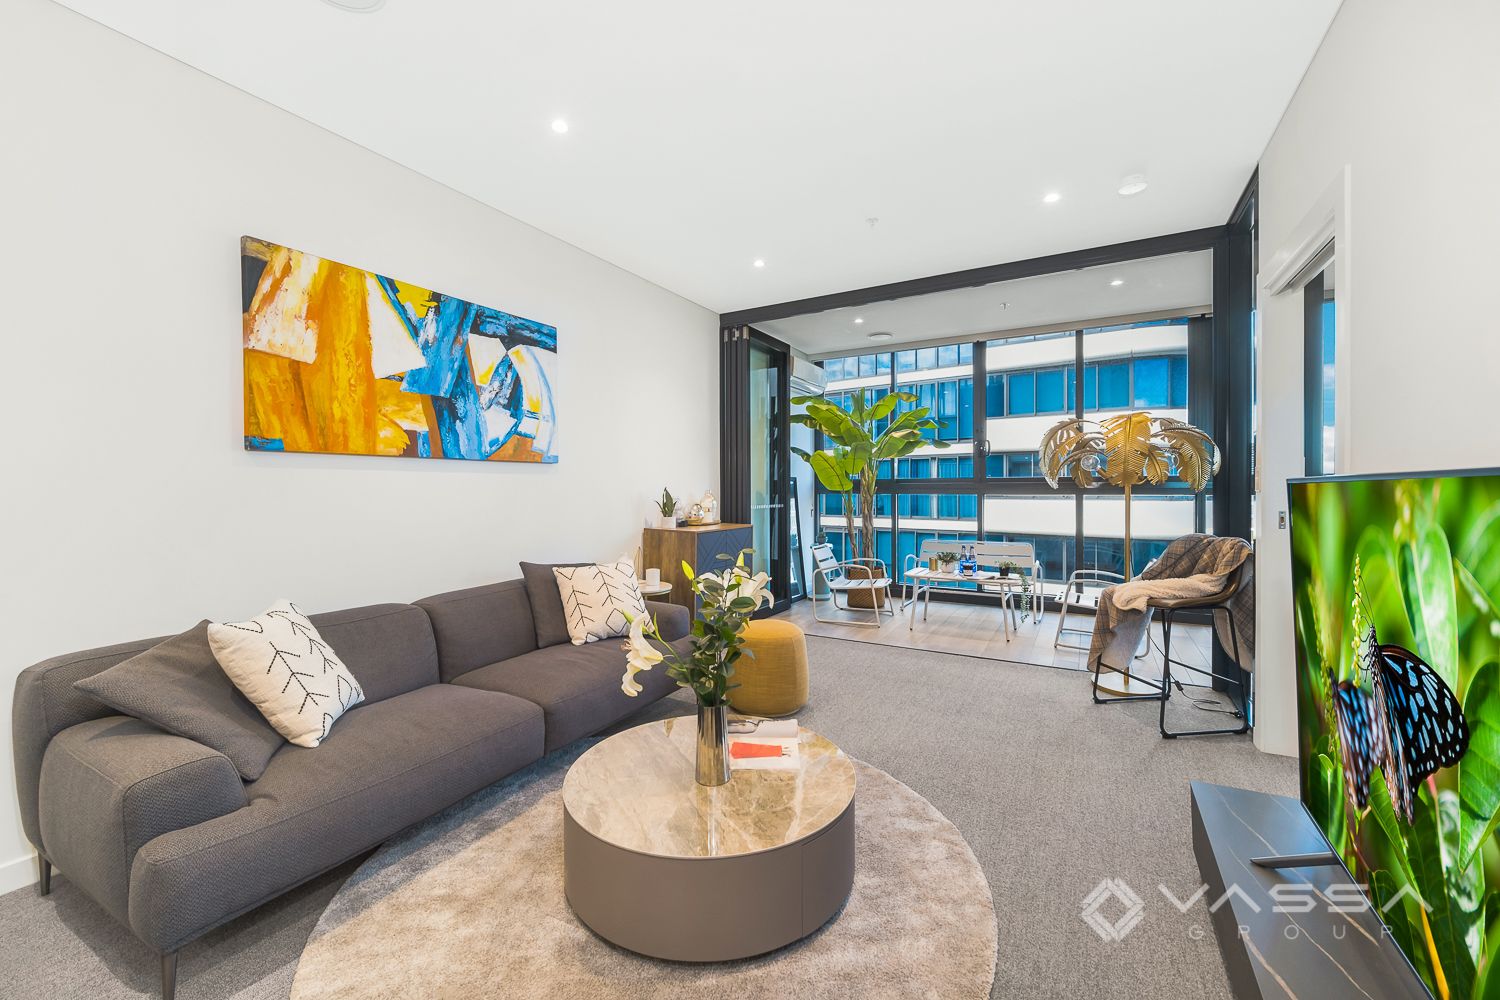 2 bedrooms Apartment / Unit / Flat in Level 9, 901/3 Footbridge Boulevard WENTWORTH POINT NSW, 2127